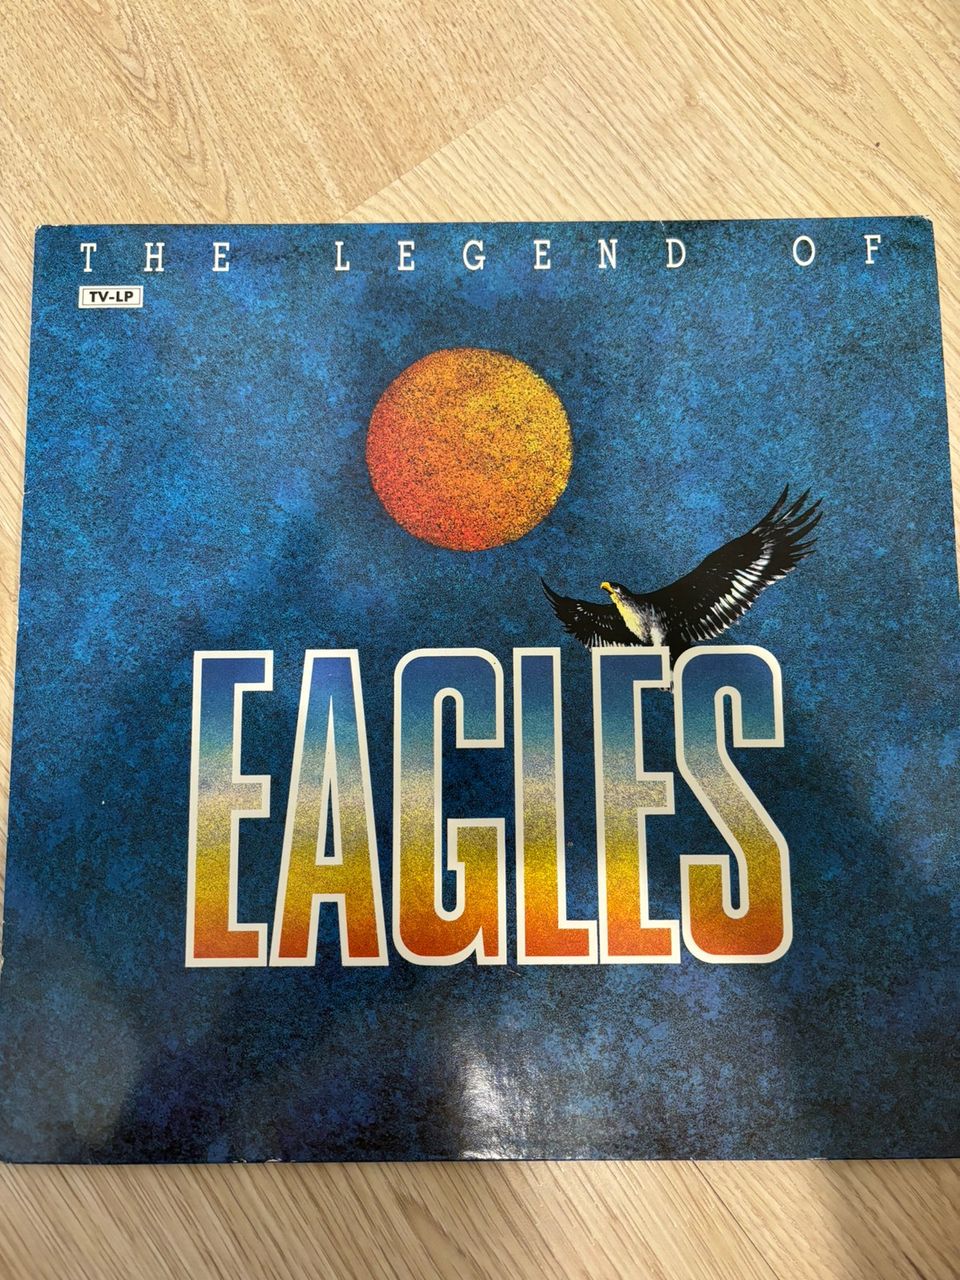 The legend of eagles